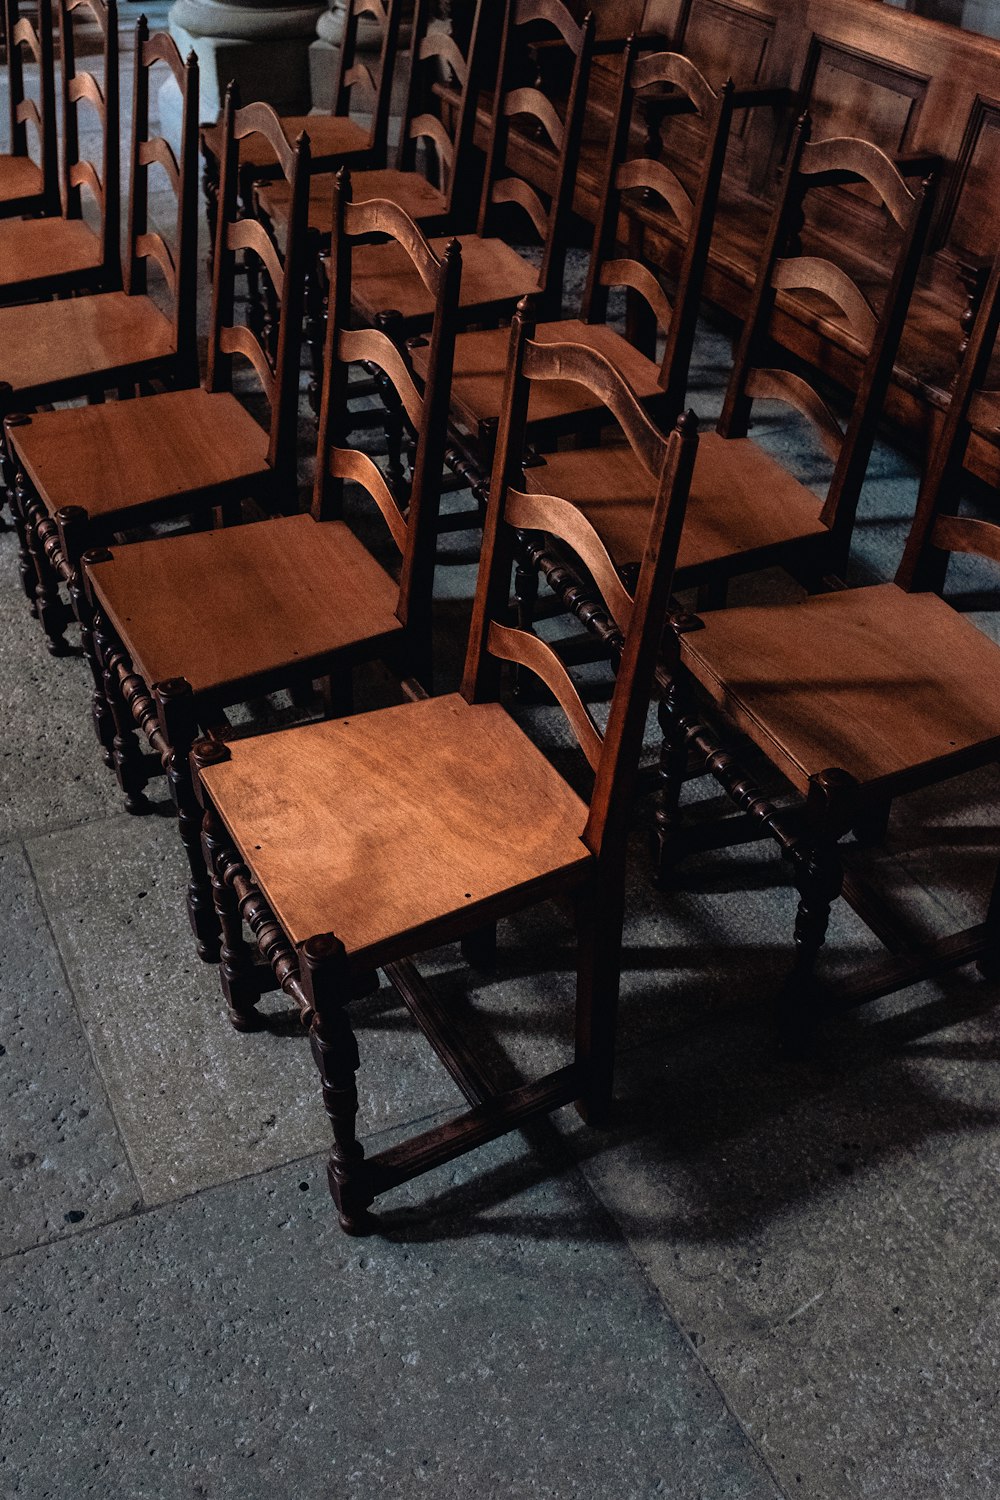 a row of wooden chairs sitting next to each other